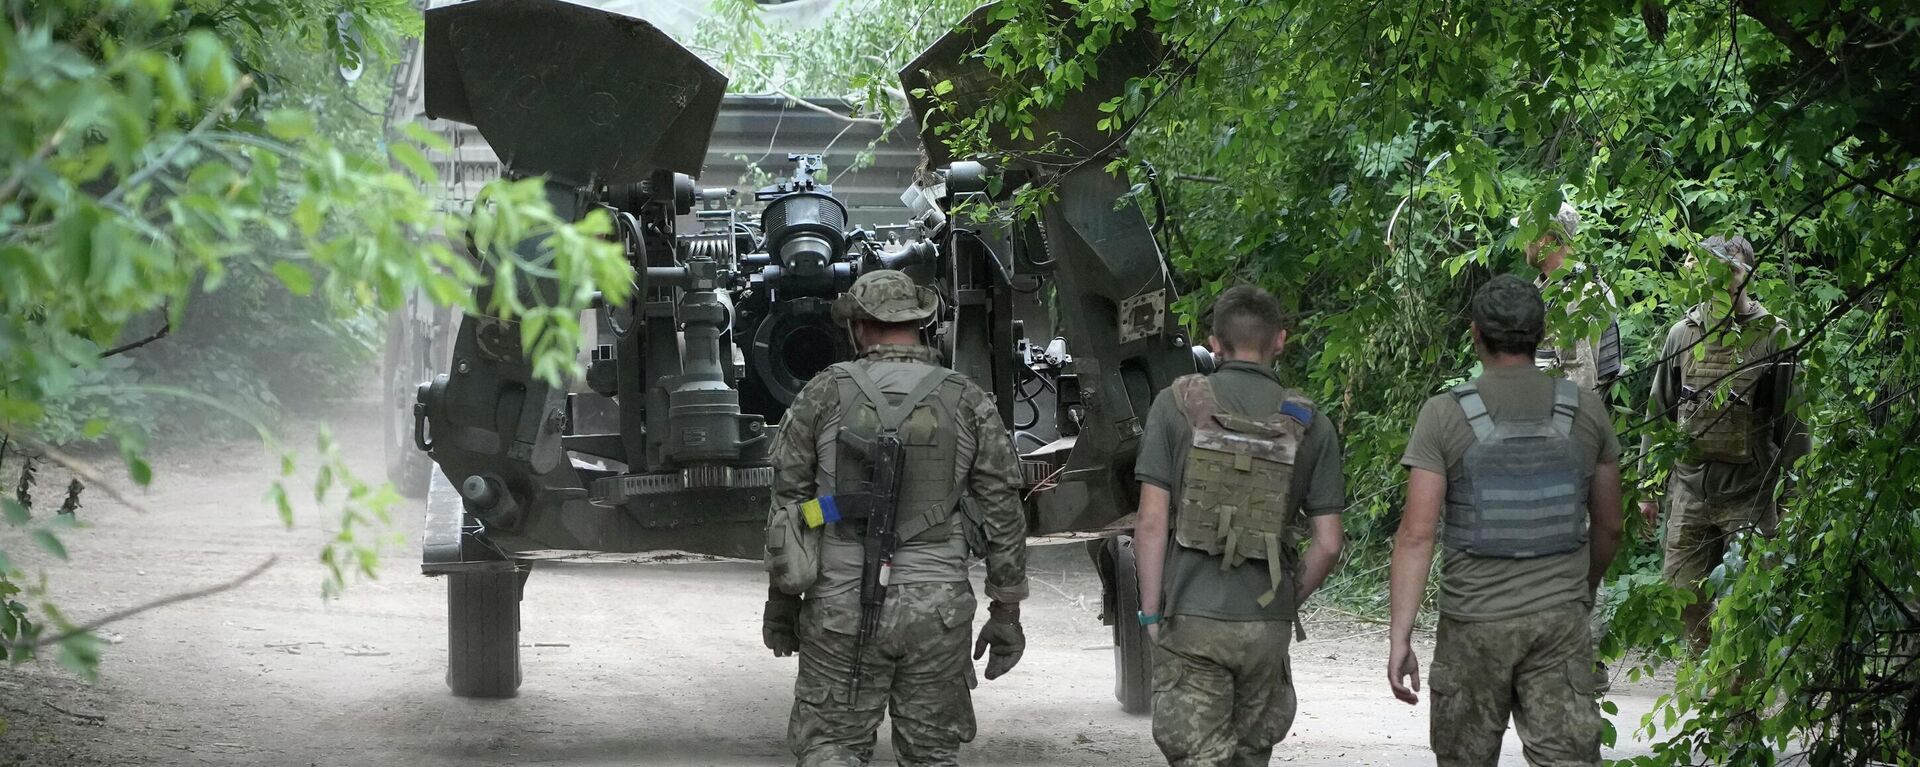 Ukrainian soldiers move a U.S.-supplied M777 howitzer into position to fire at Russian positions in Ukraine's eastern Donbas region Saturday, June 18, 2022 - Sputnik International, 1920, 02.03.2023